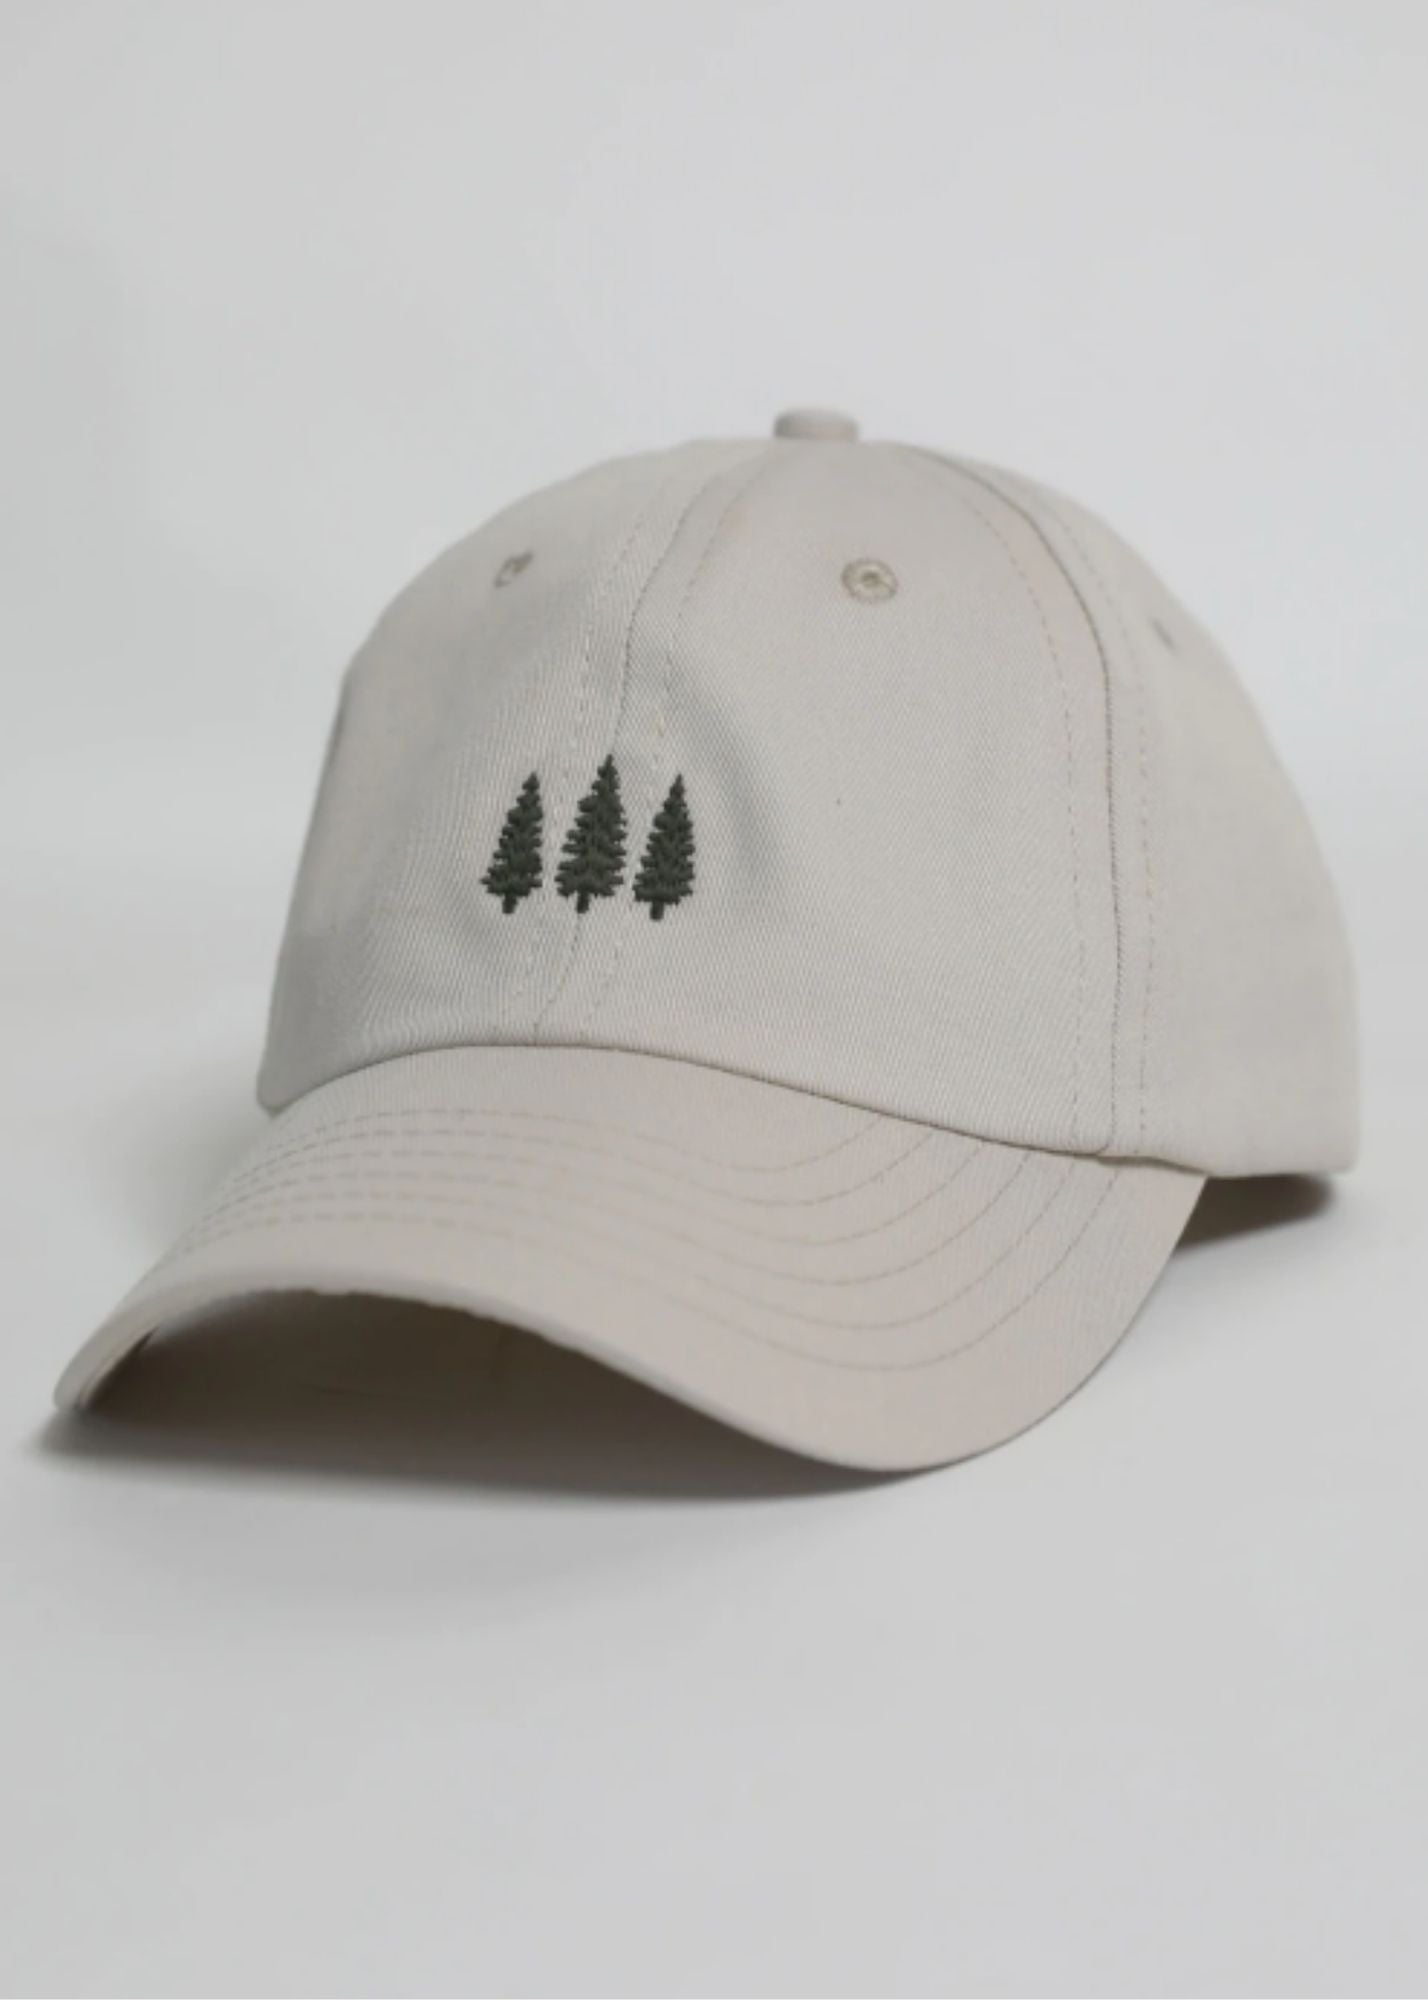 Embroidered Pine Tree Ballcap Hat Accessories